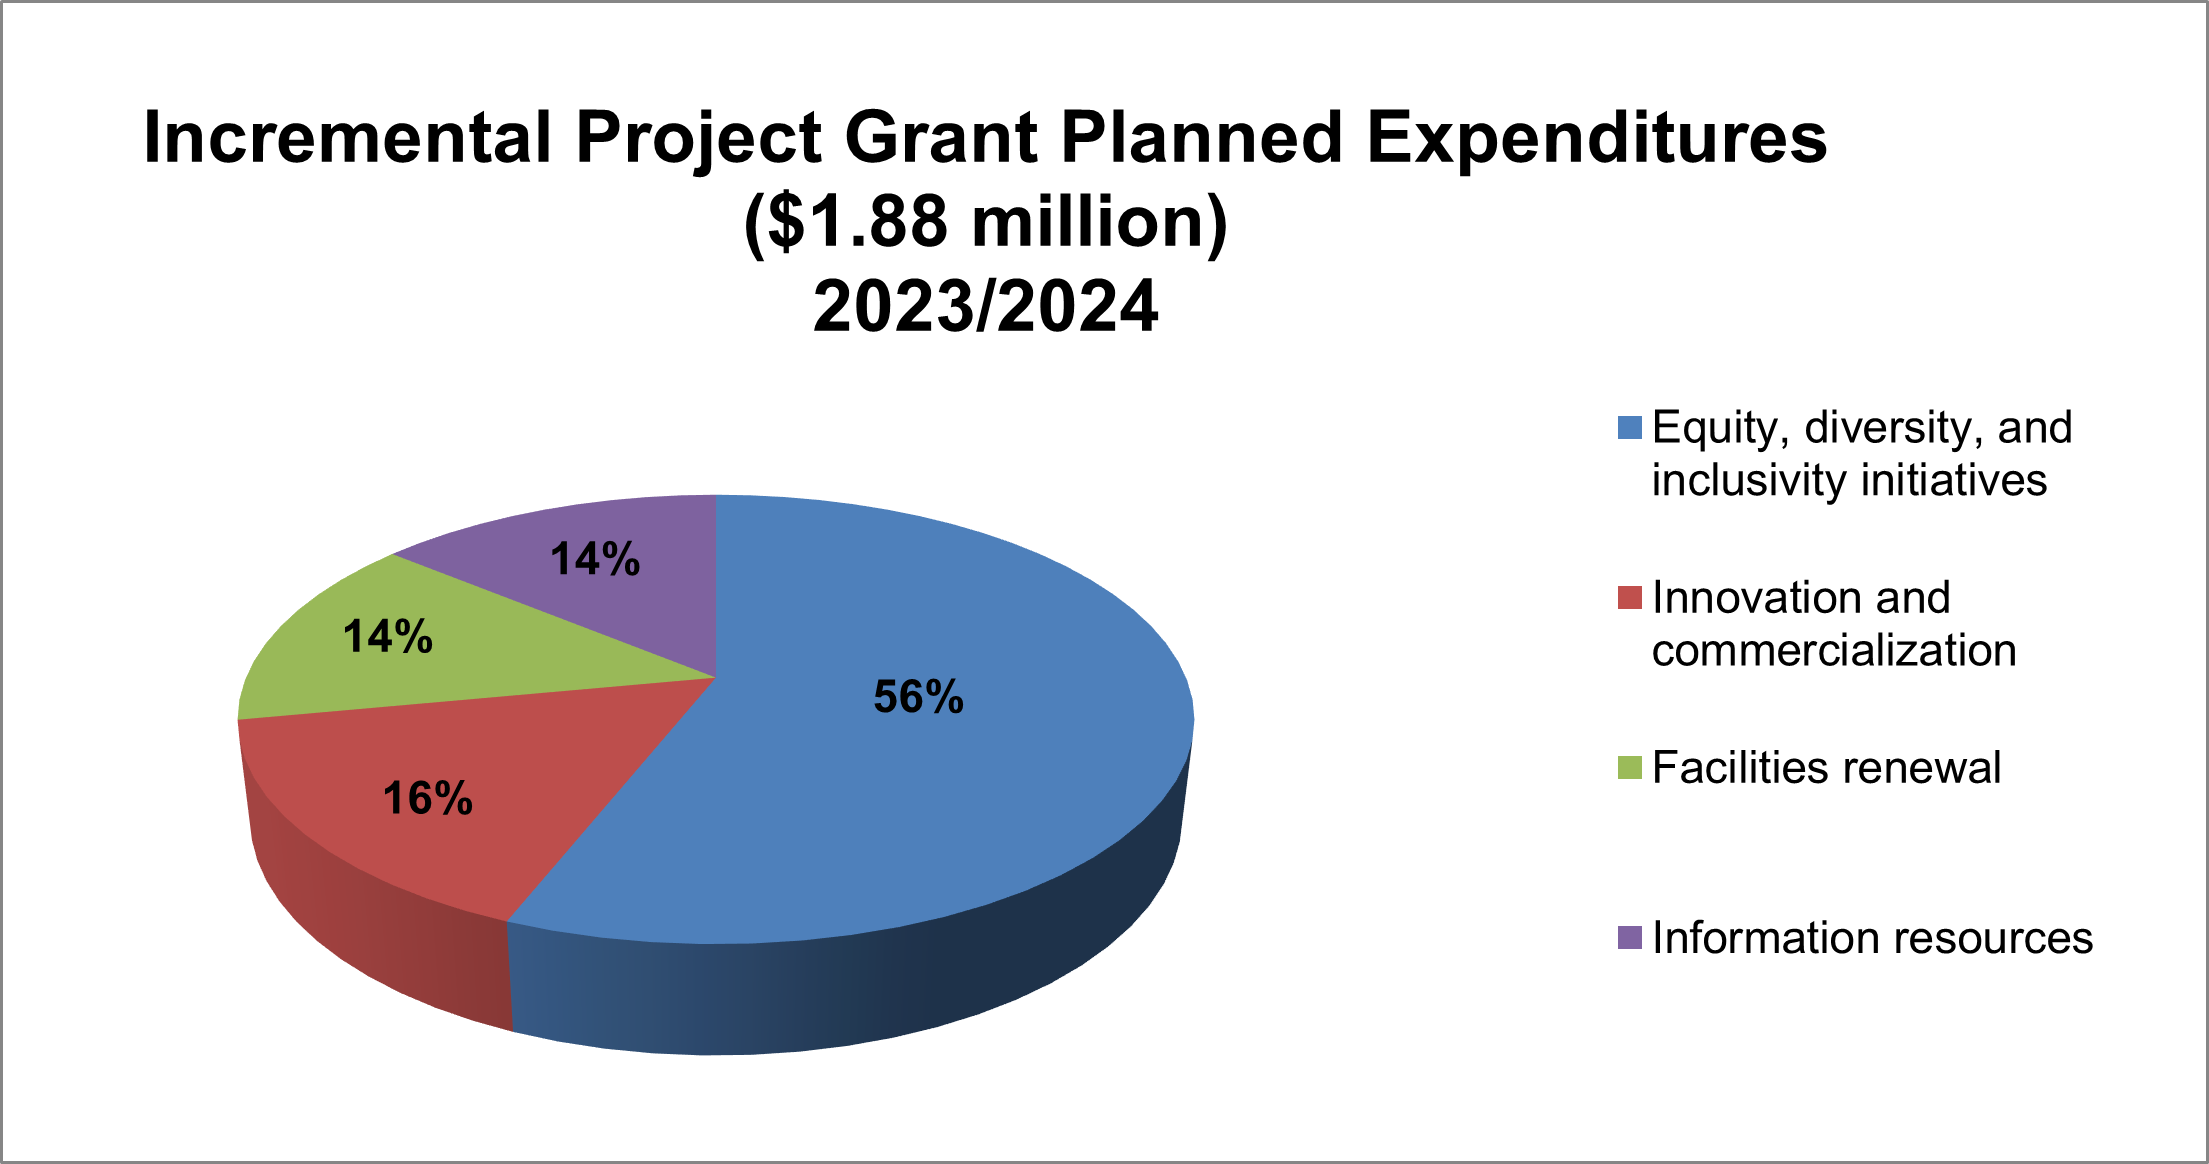 Incremental Project Grant Planned Expenditures ($1.88 million) 2023/2024 pie chart with 4 segments